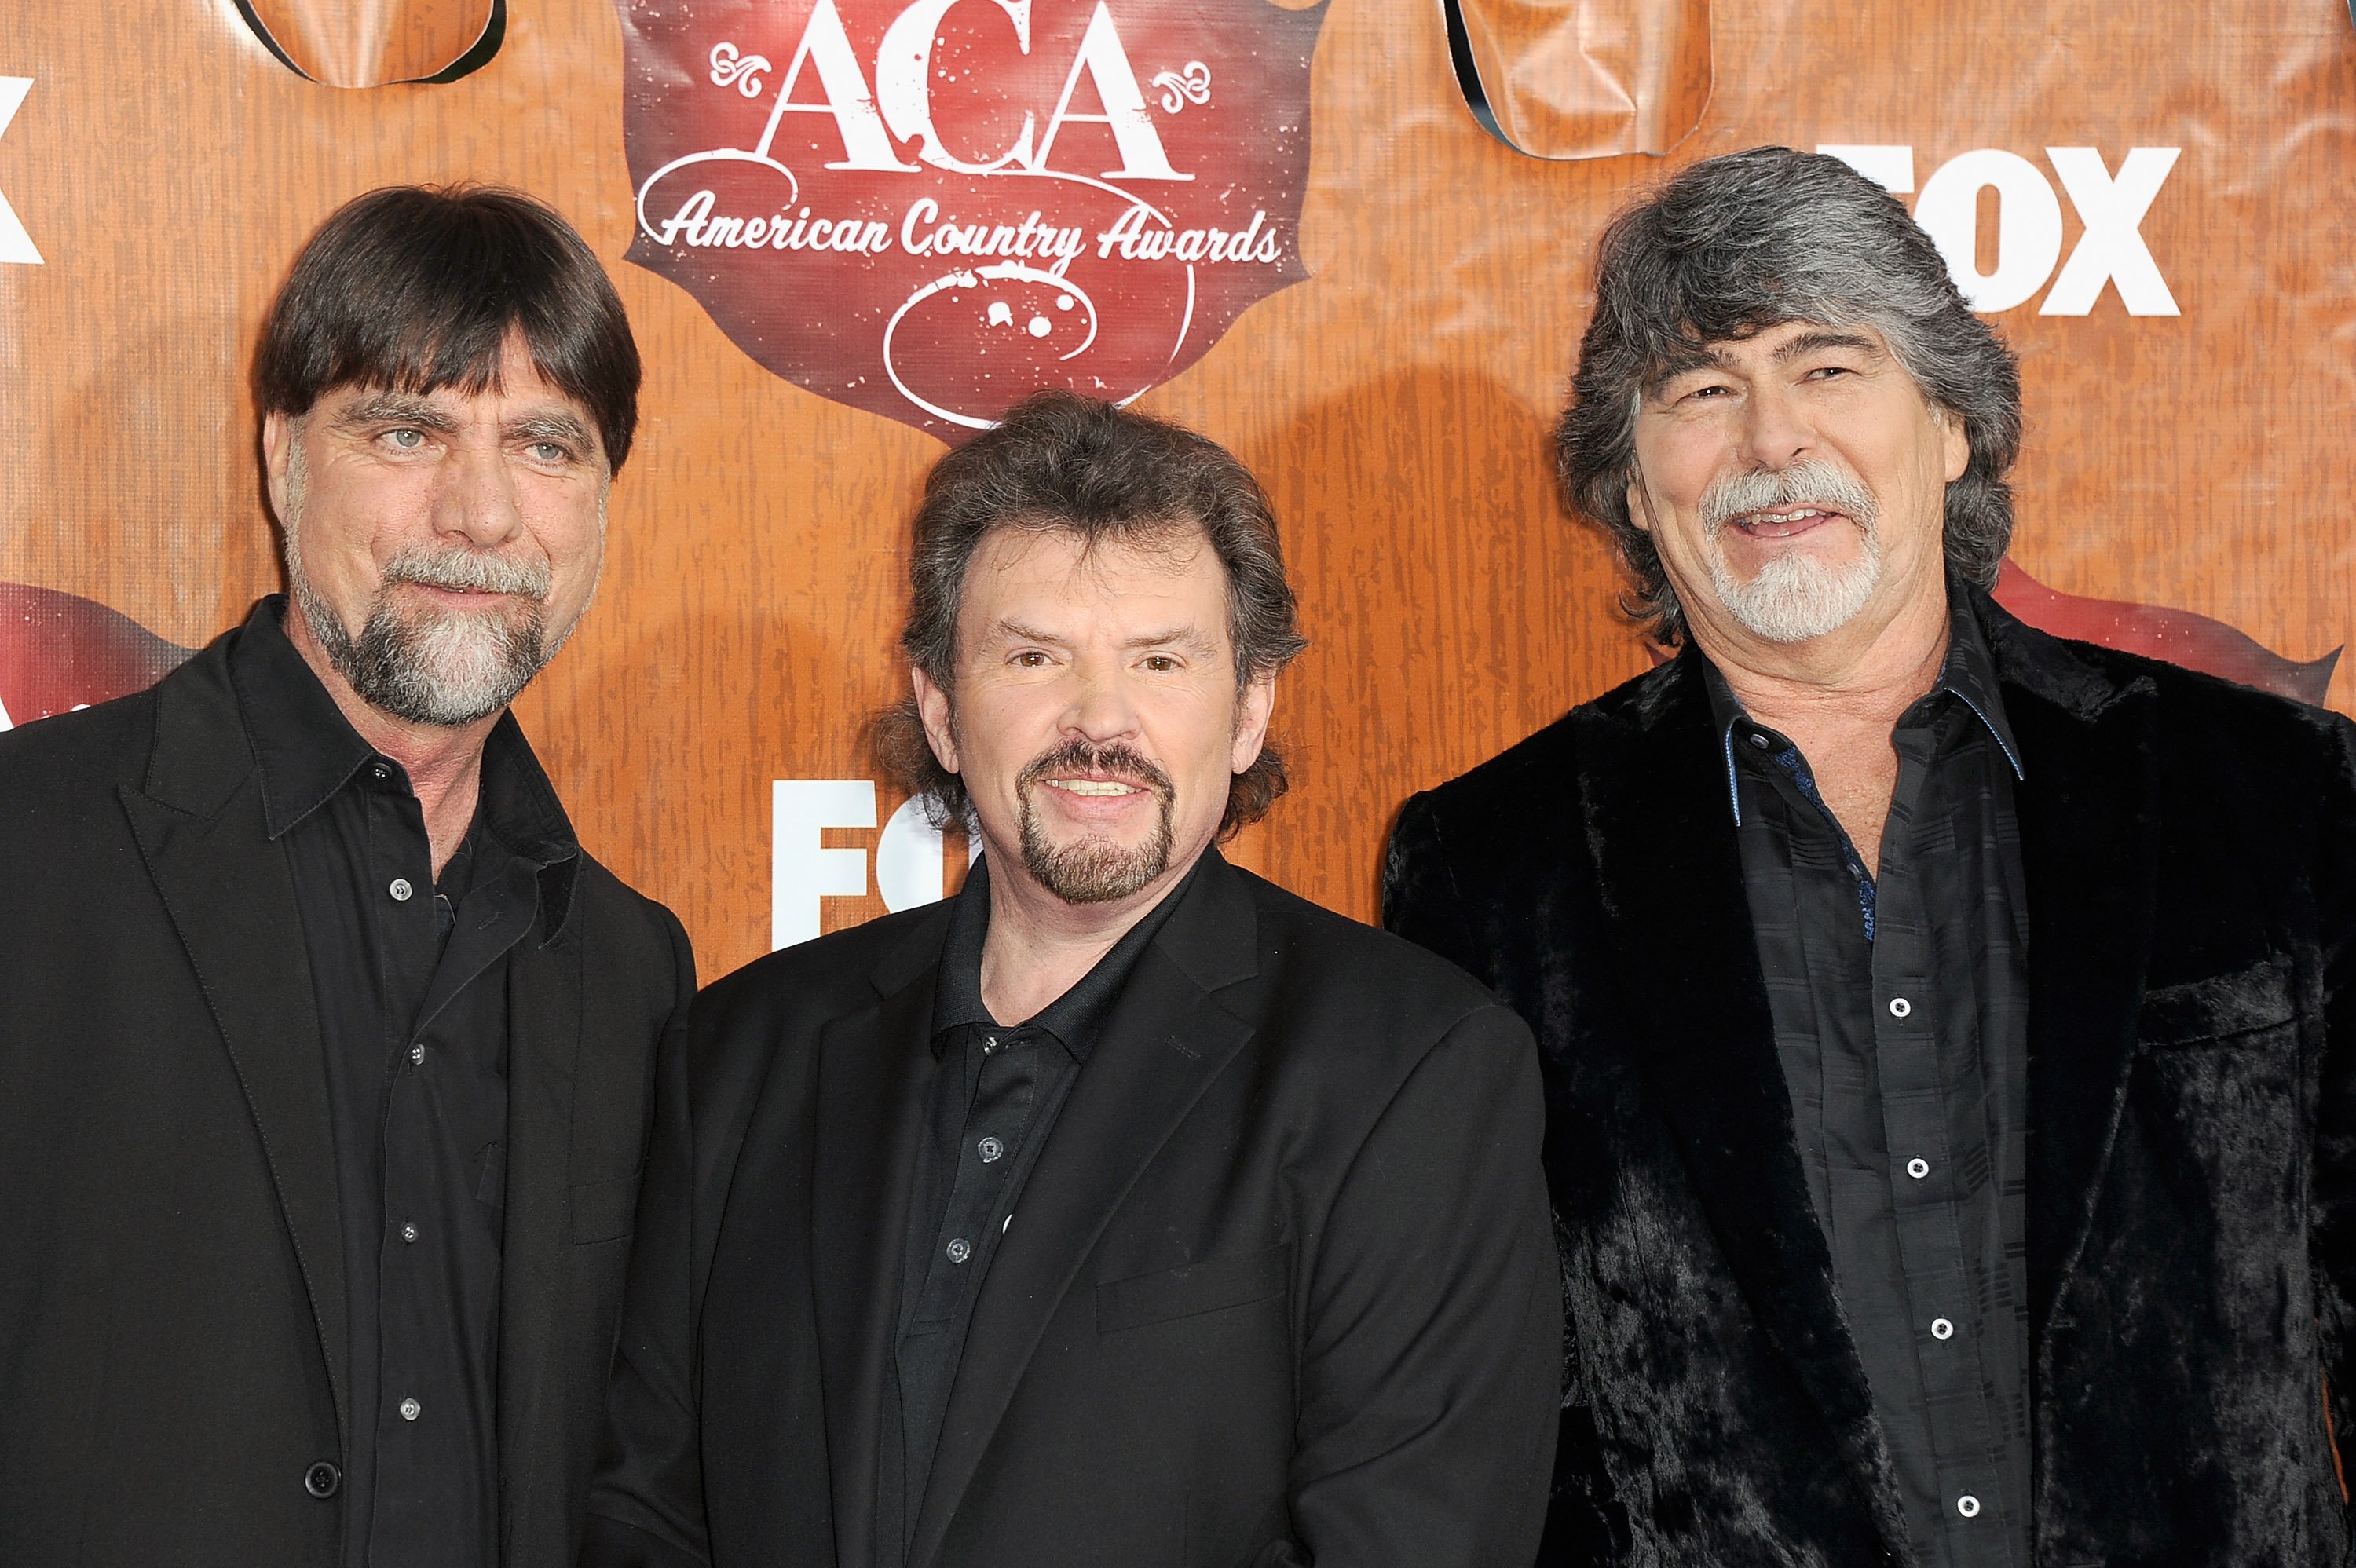 eddy Gentry, Jeff Cook and Randy Owen of music group Alabama arrives at the American Country Awards 2011 at the MGM Grand Garden Arena on December 5, 2011 in Las Vegas, Nevada | Source: Getty Images 